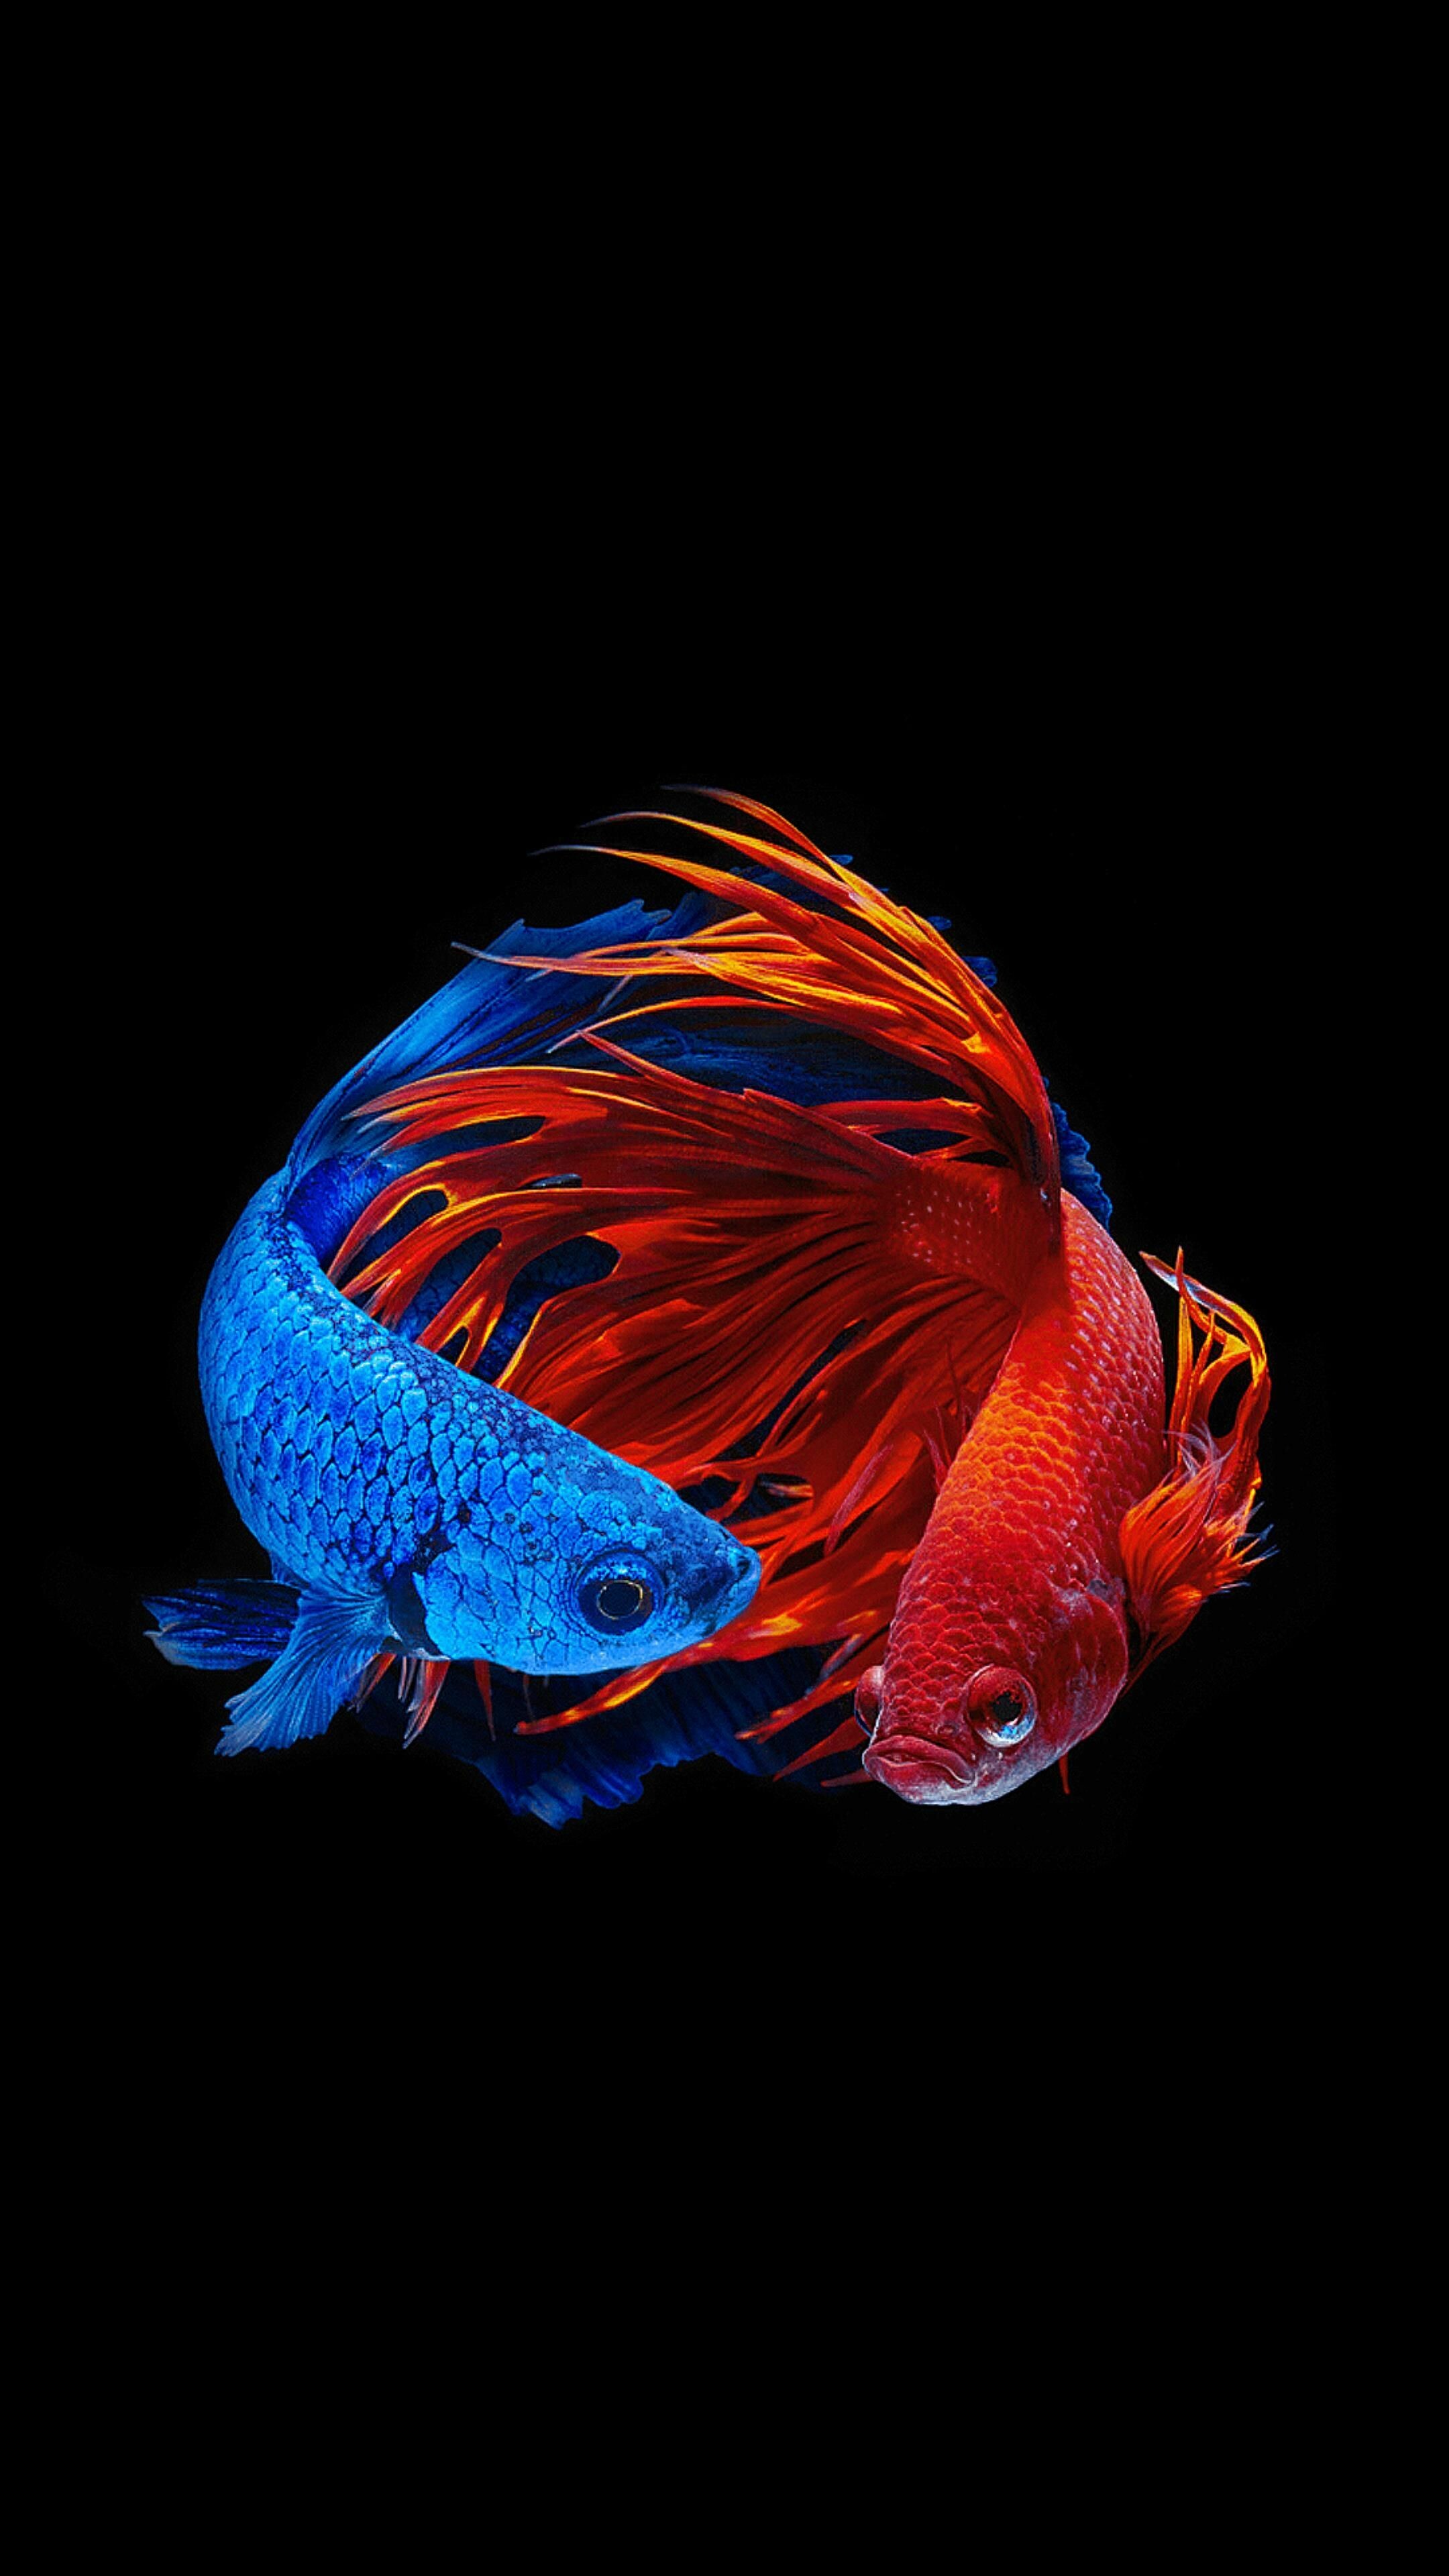 Amoled fish wallpapers, OLED display, Vibrant underwater imagery, Stunning color contrast, 2160x3840 4K Phone